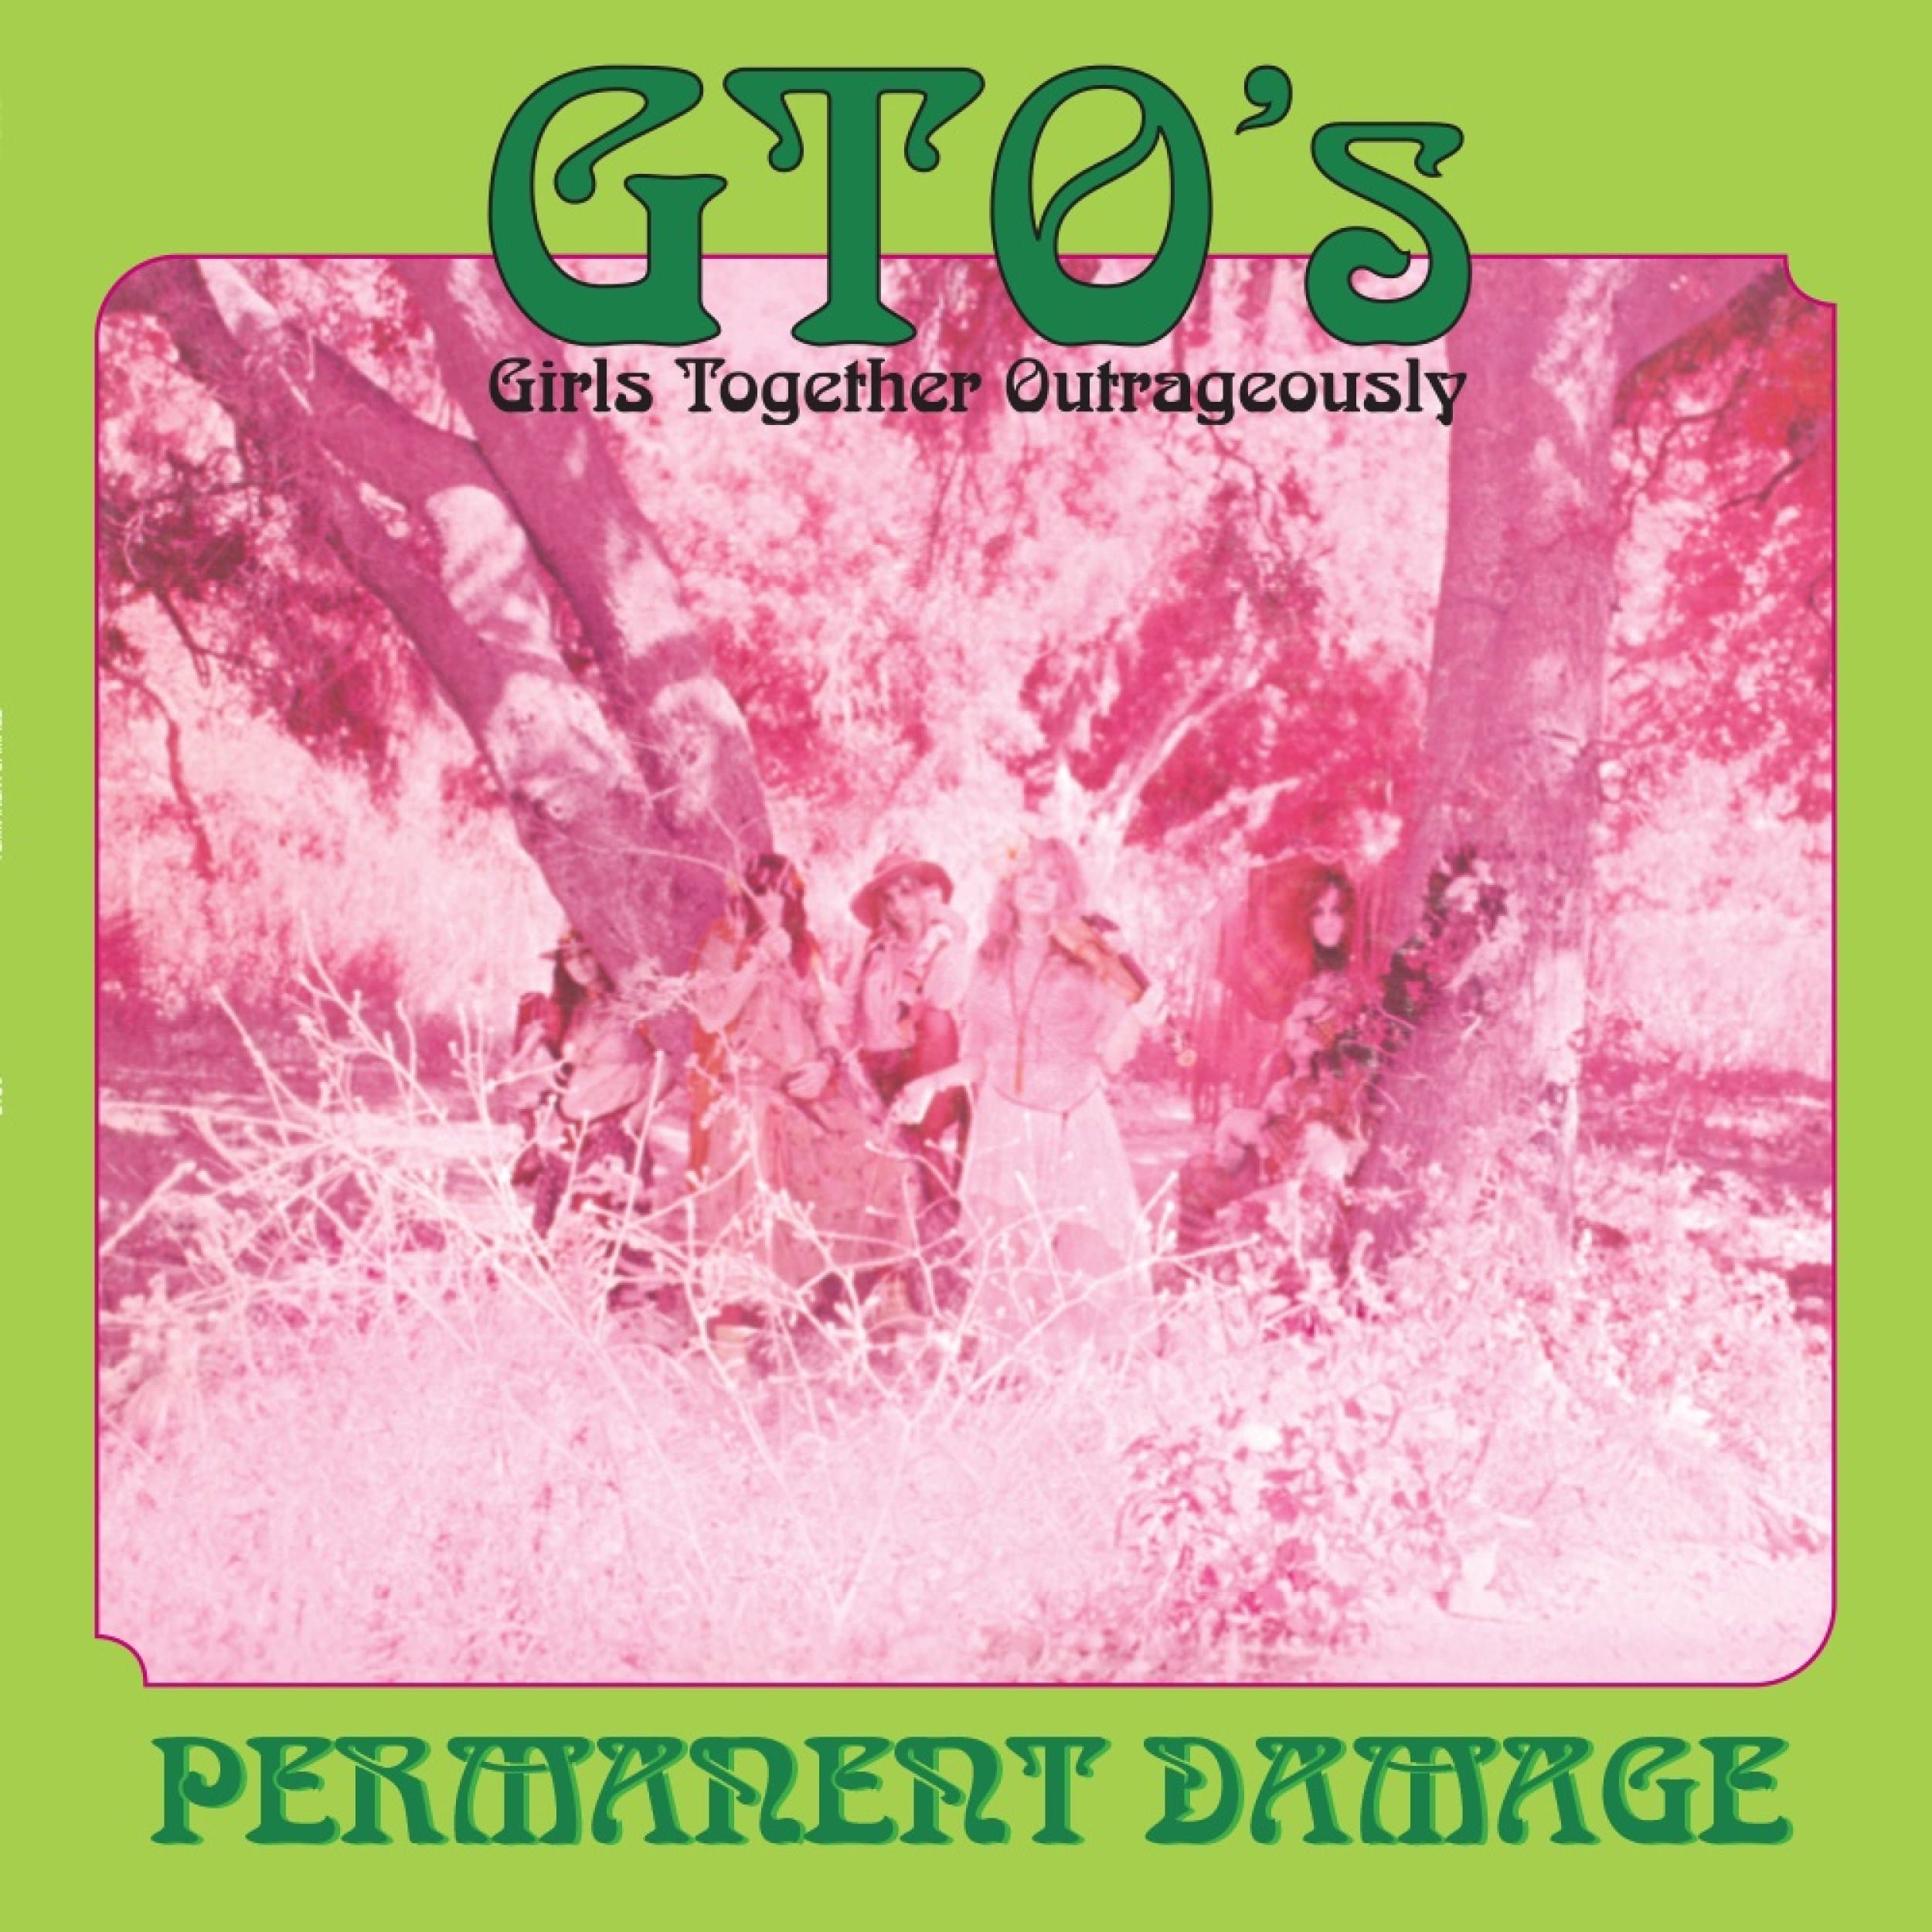 GTO's/Frank Zappa - Permanent Damage - GSGZ024LP - DIGGERS FACTORY/GREY SCALE